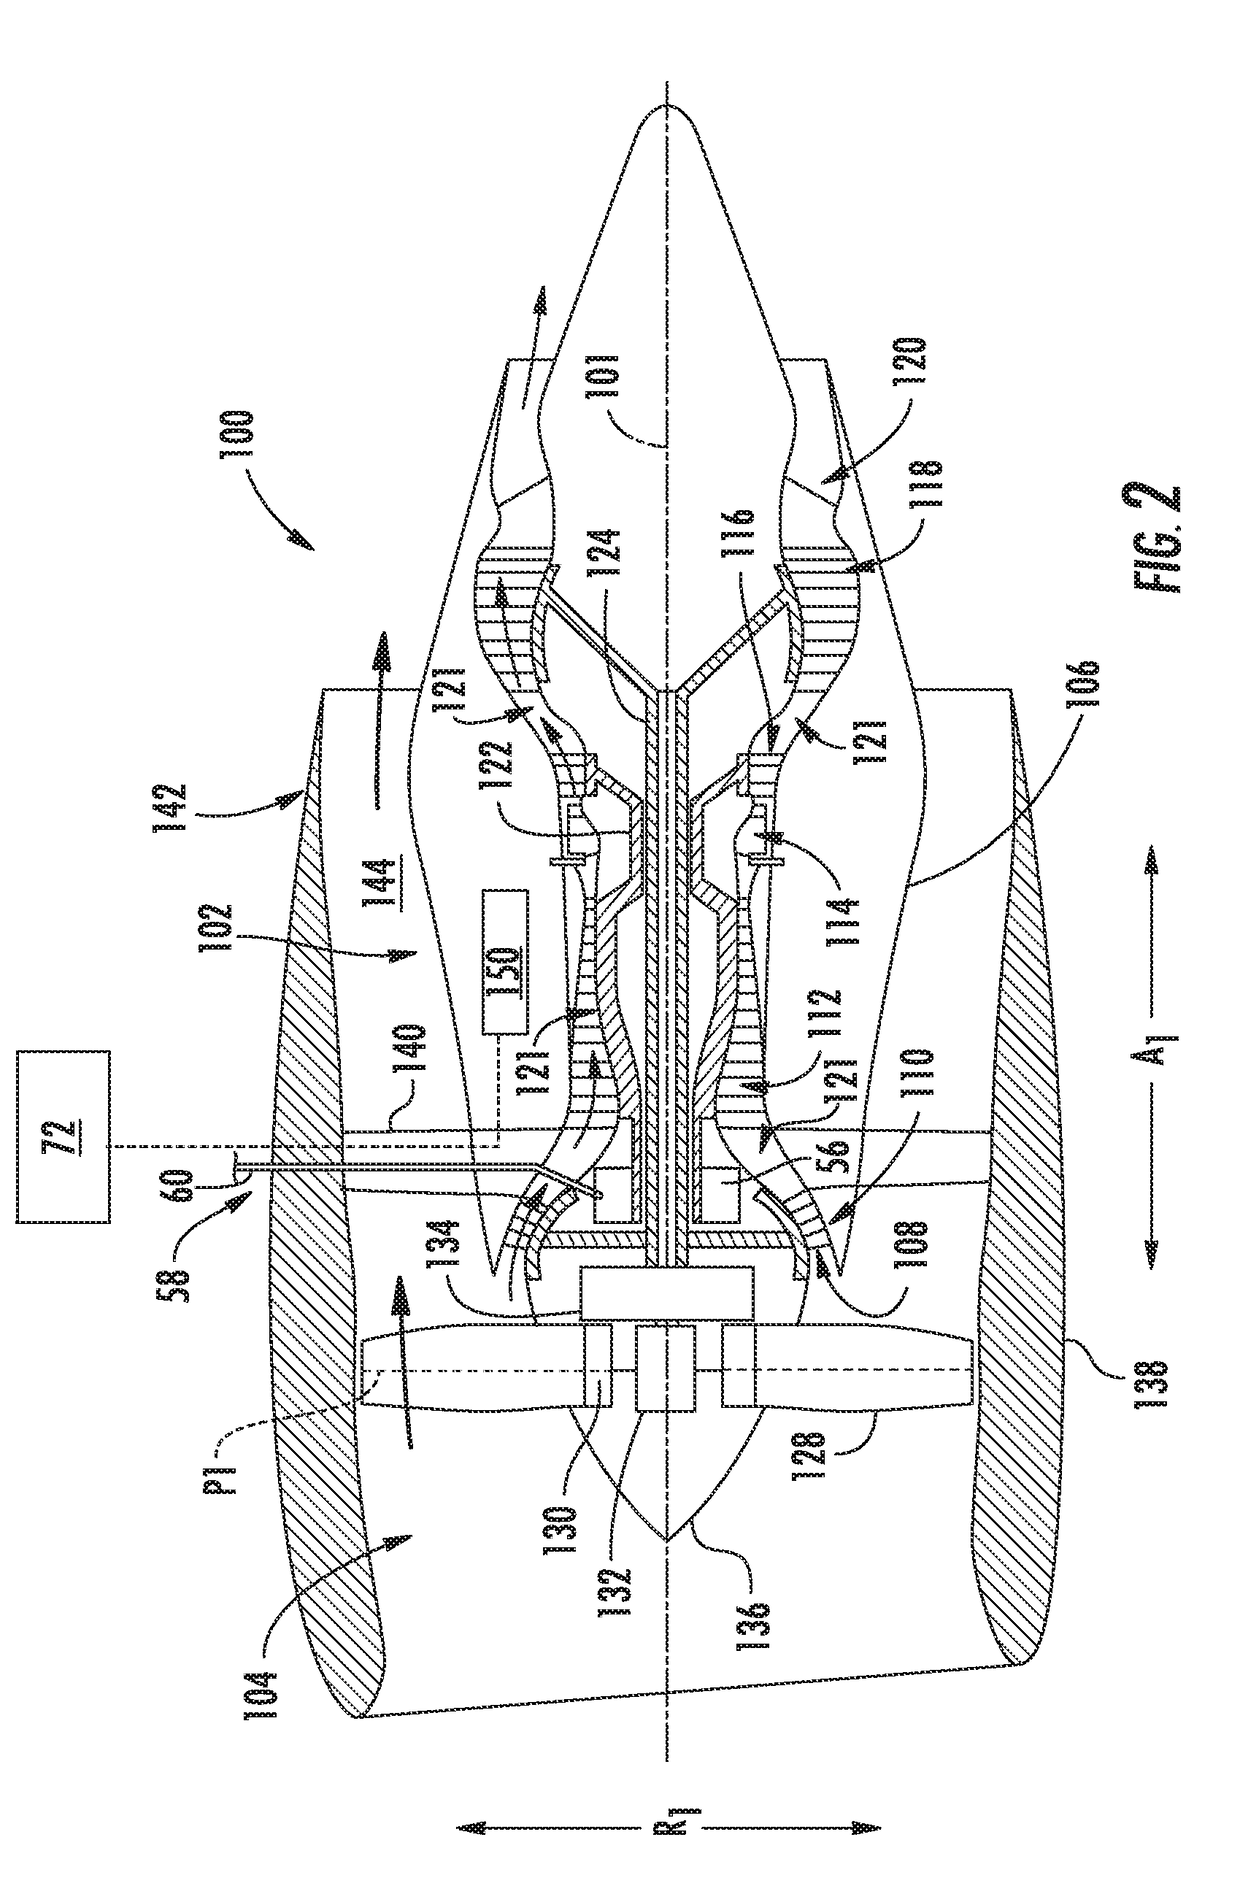 Propulsion system for an aircraft